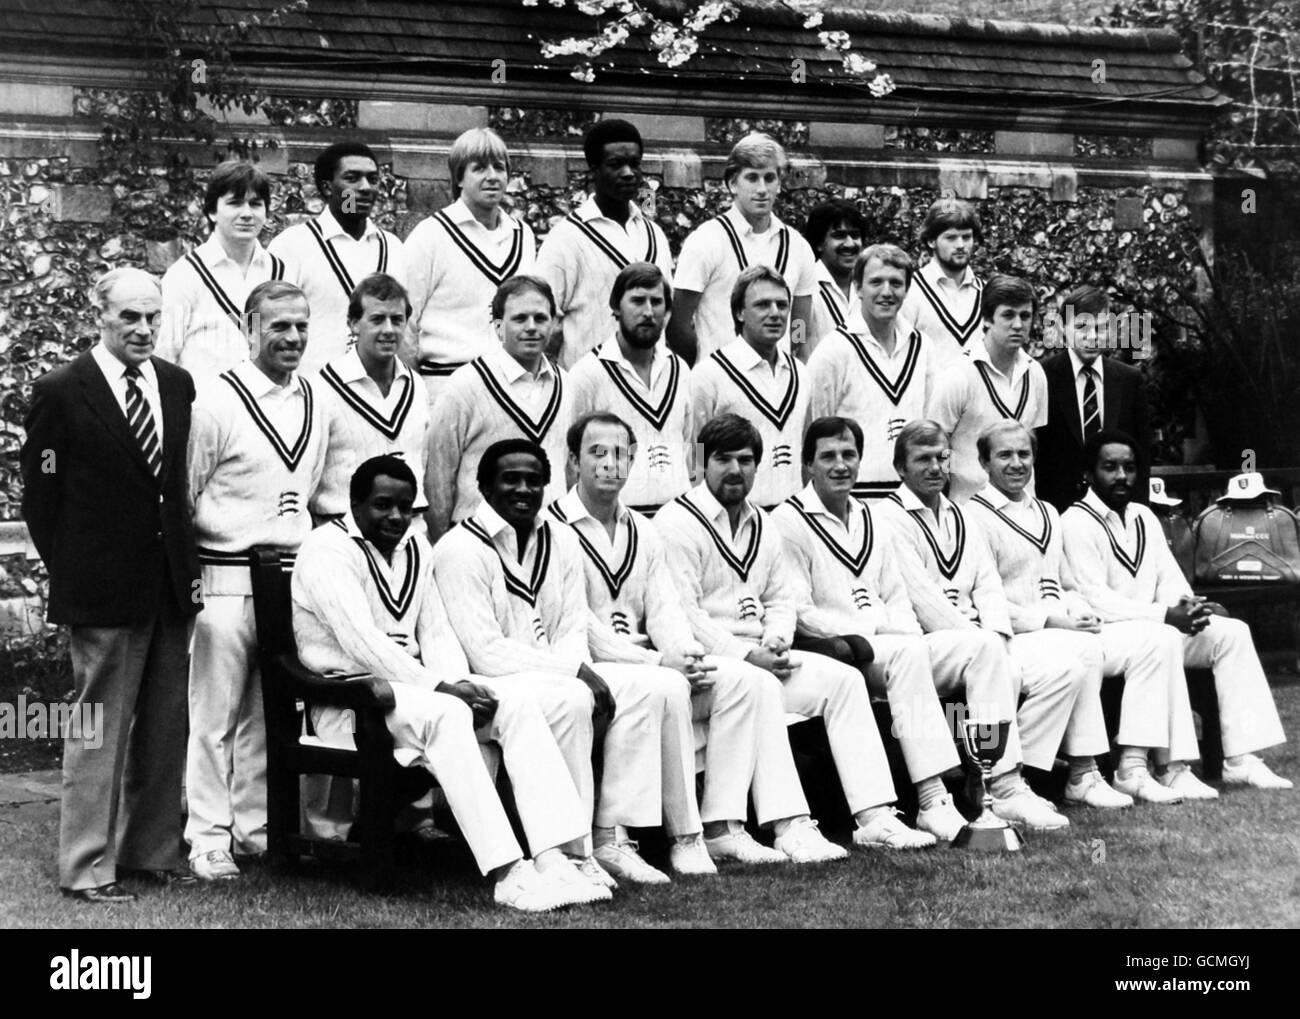 Cricket - Middlesex County Cricket Club - Team - 1983 - Signore Foto Stock